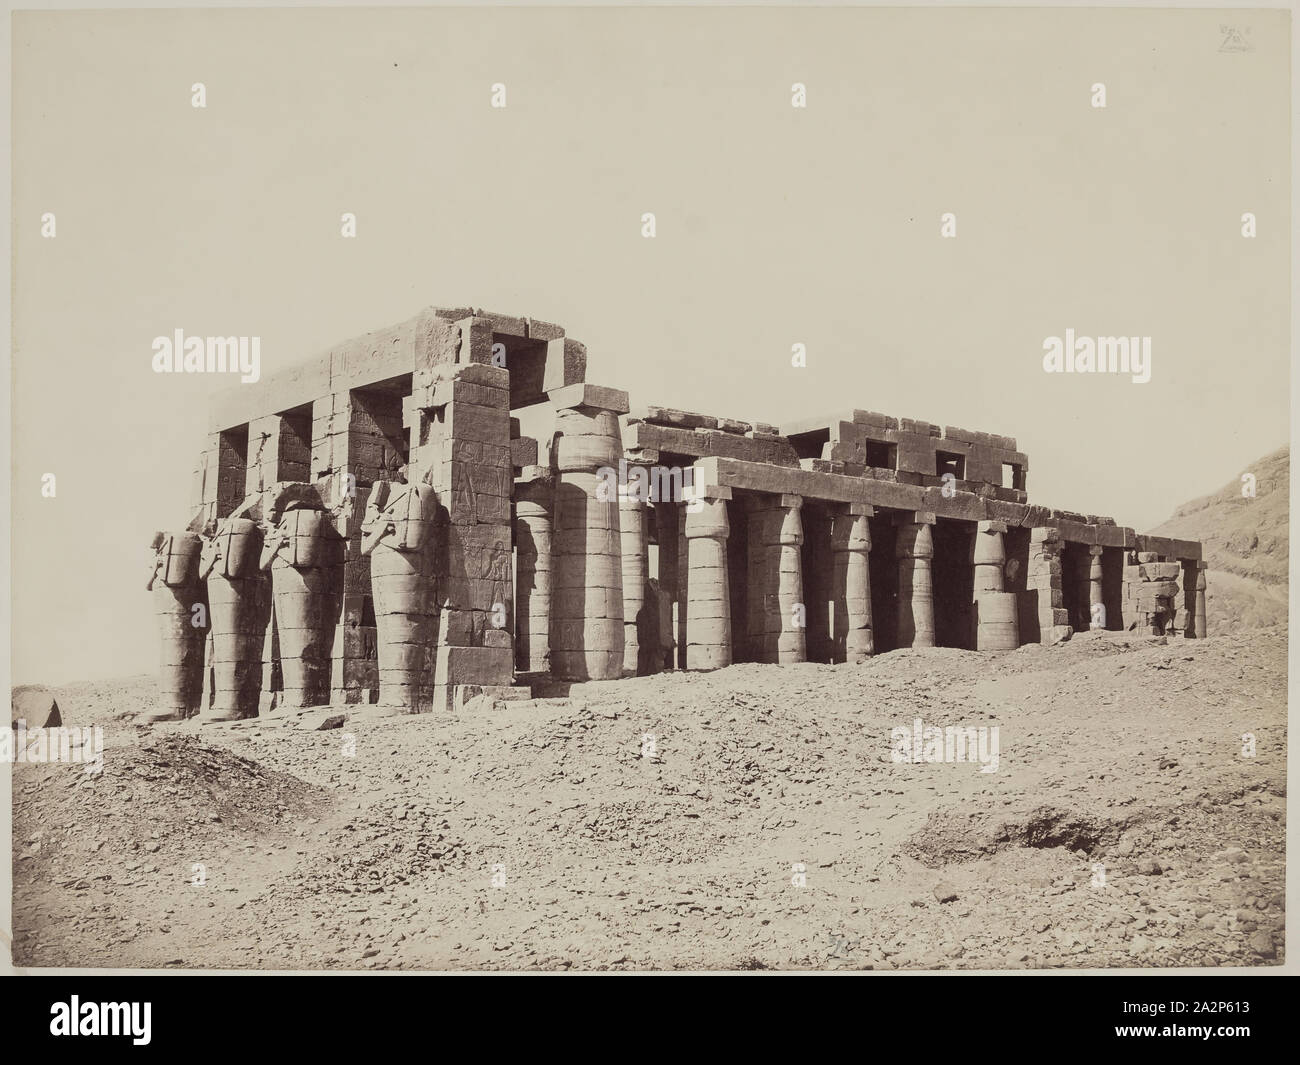 Anonymous Artist, Remains of the Hypostyle Hall of the Ramesseum. Luxor, Wes, 19th century, albumen print Stock Photo